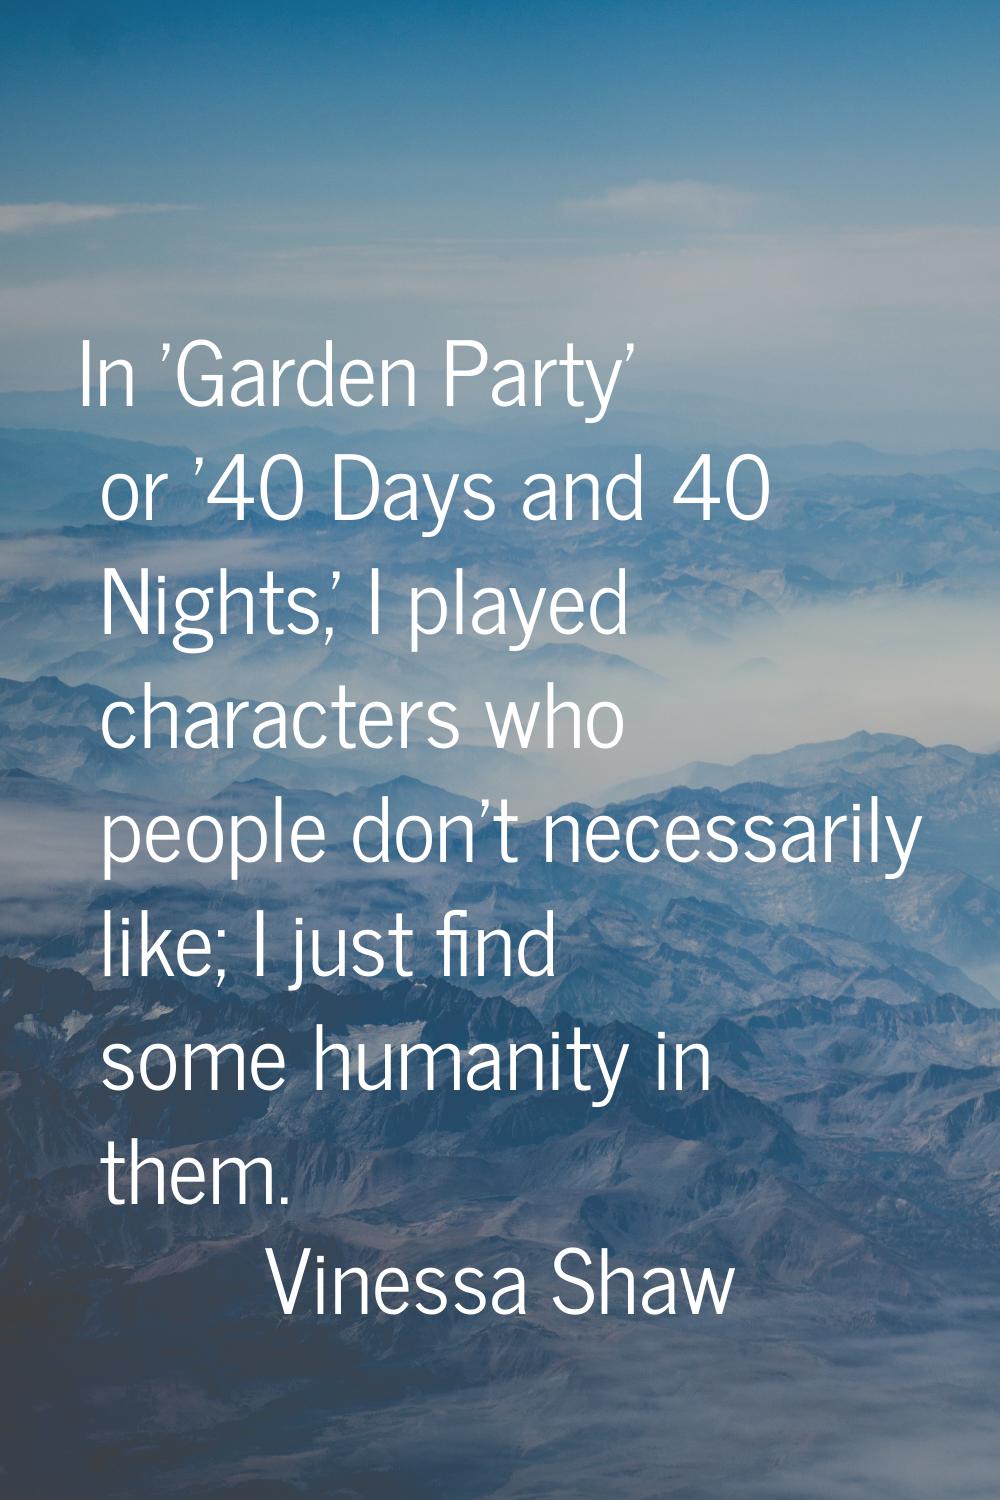 In 'Garden Party' or '40 Days and 40 Nights,' I played characters who people don't necessarily like